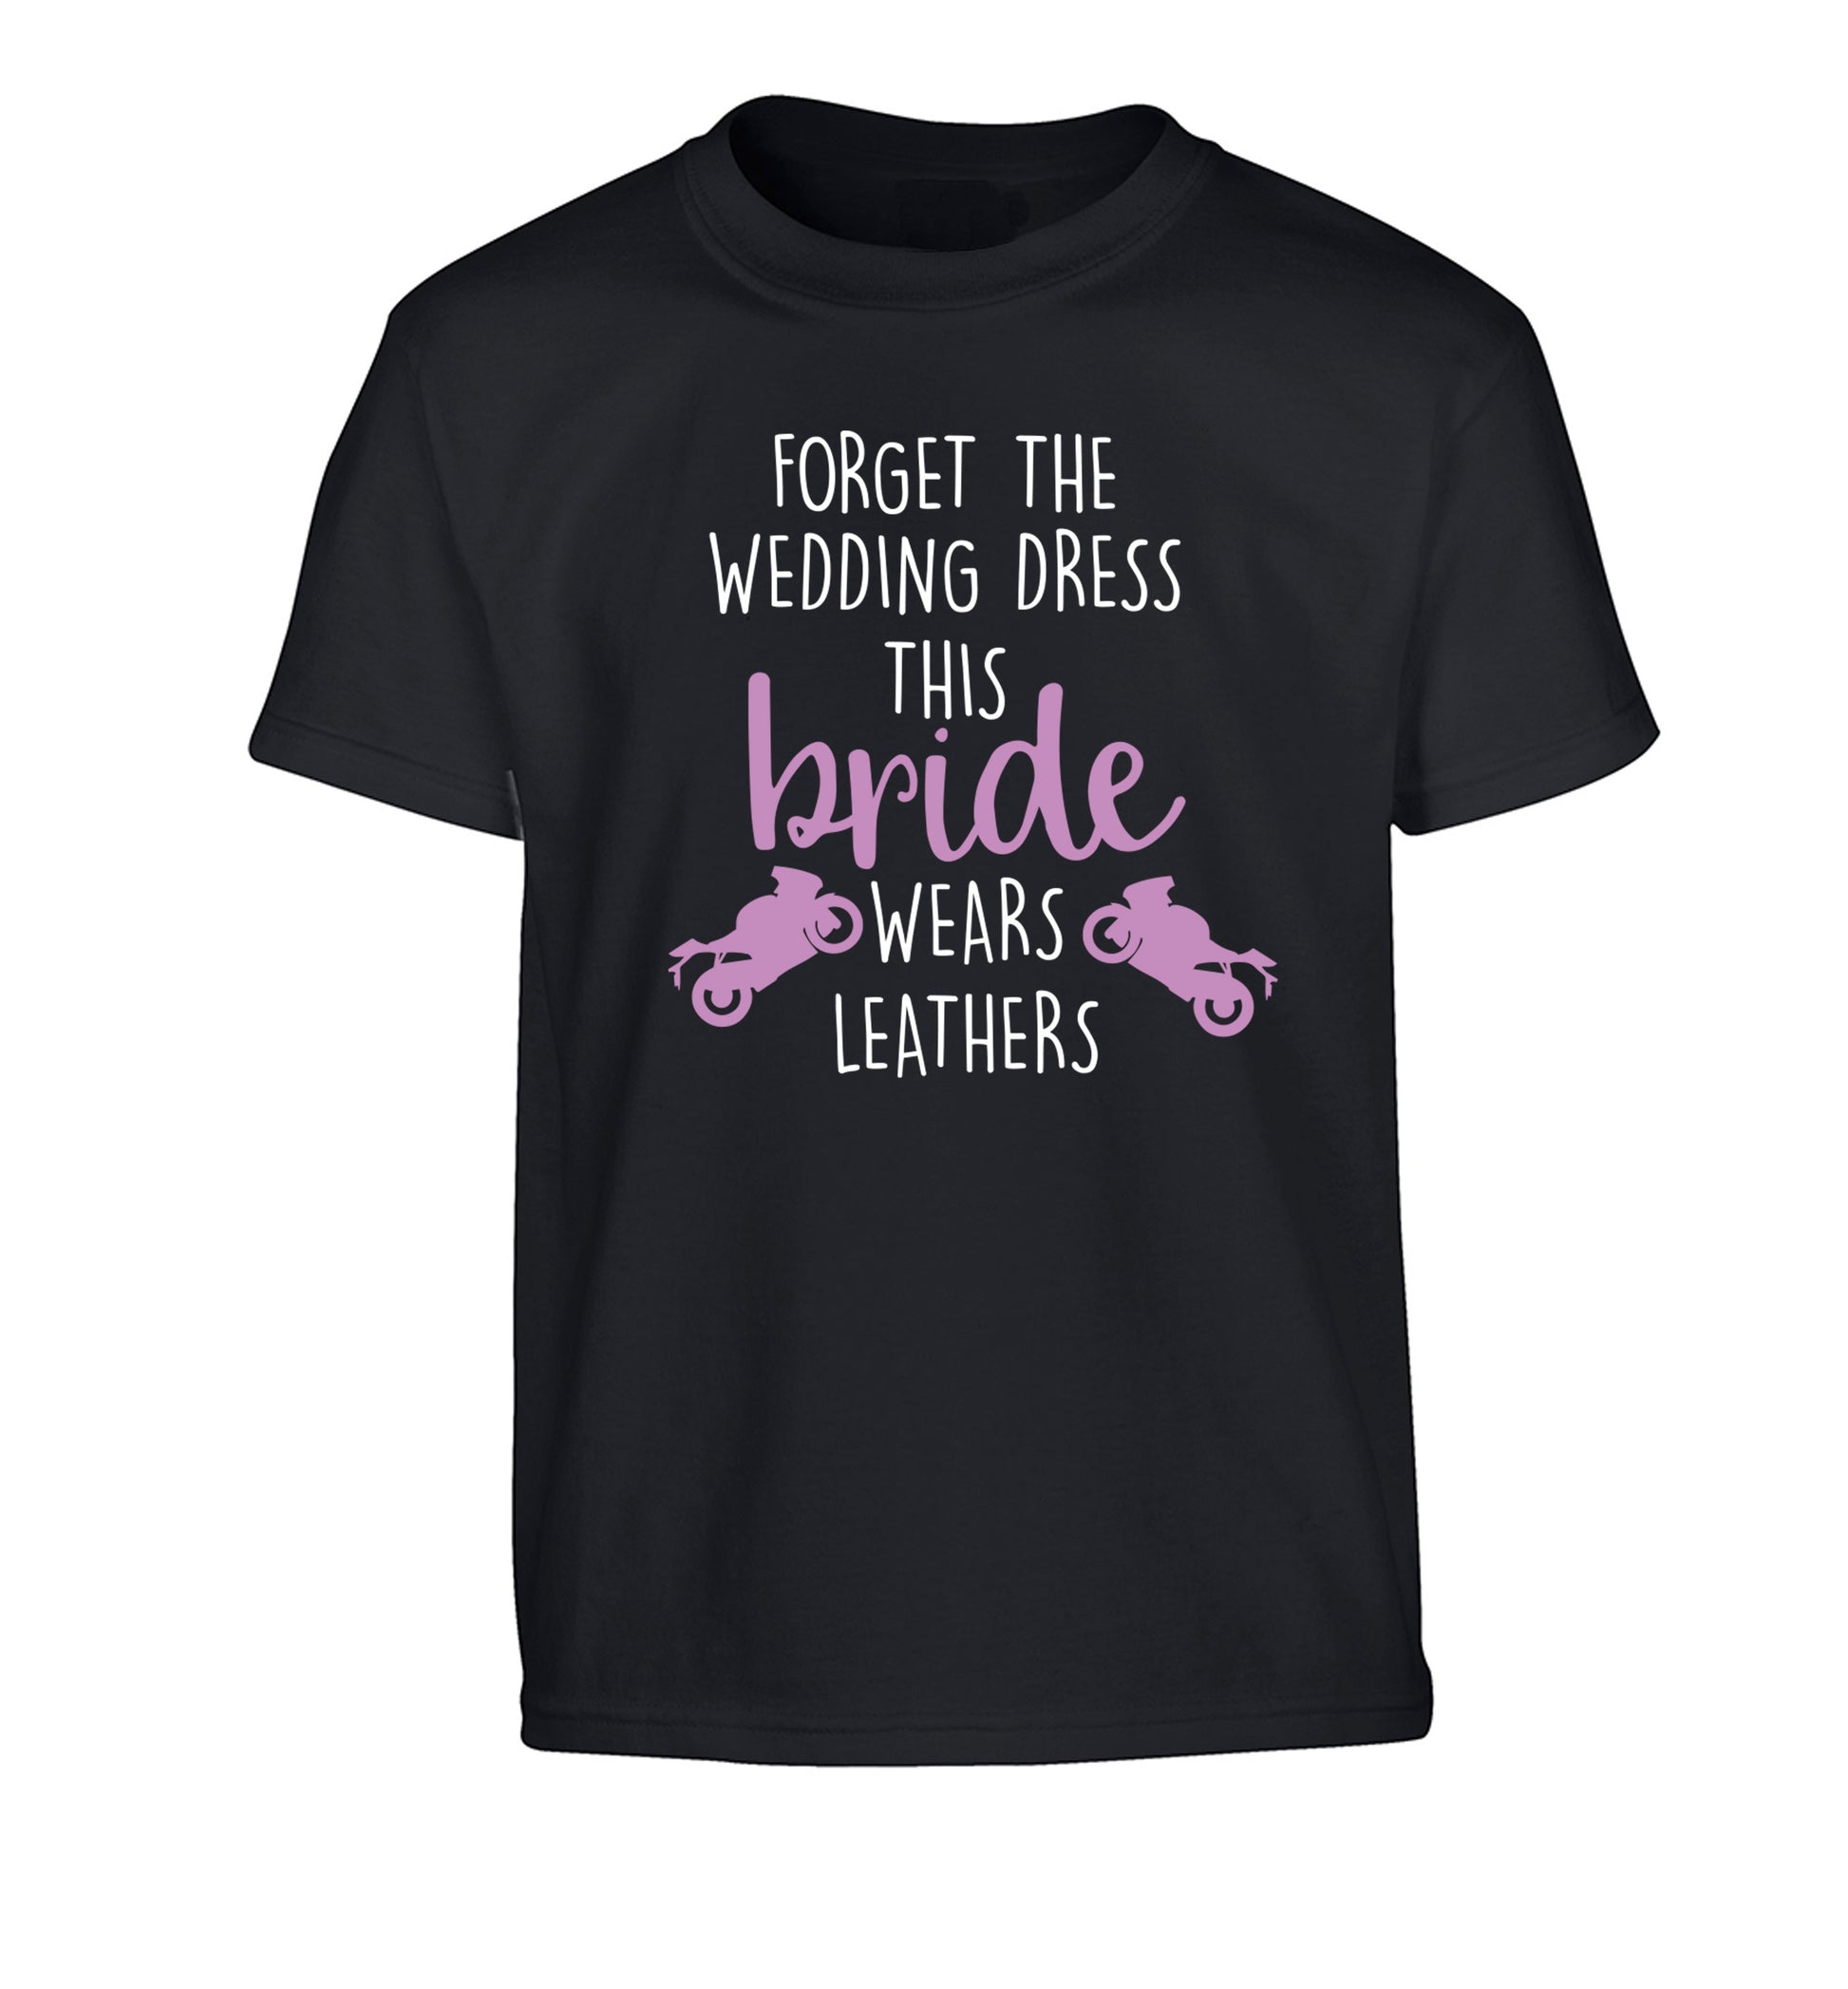 Forget the wedding dress this bride wears leathers Children's black Tshirt 12-13 Years